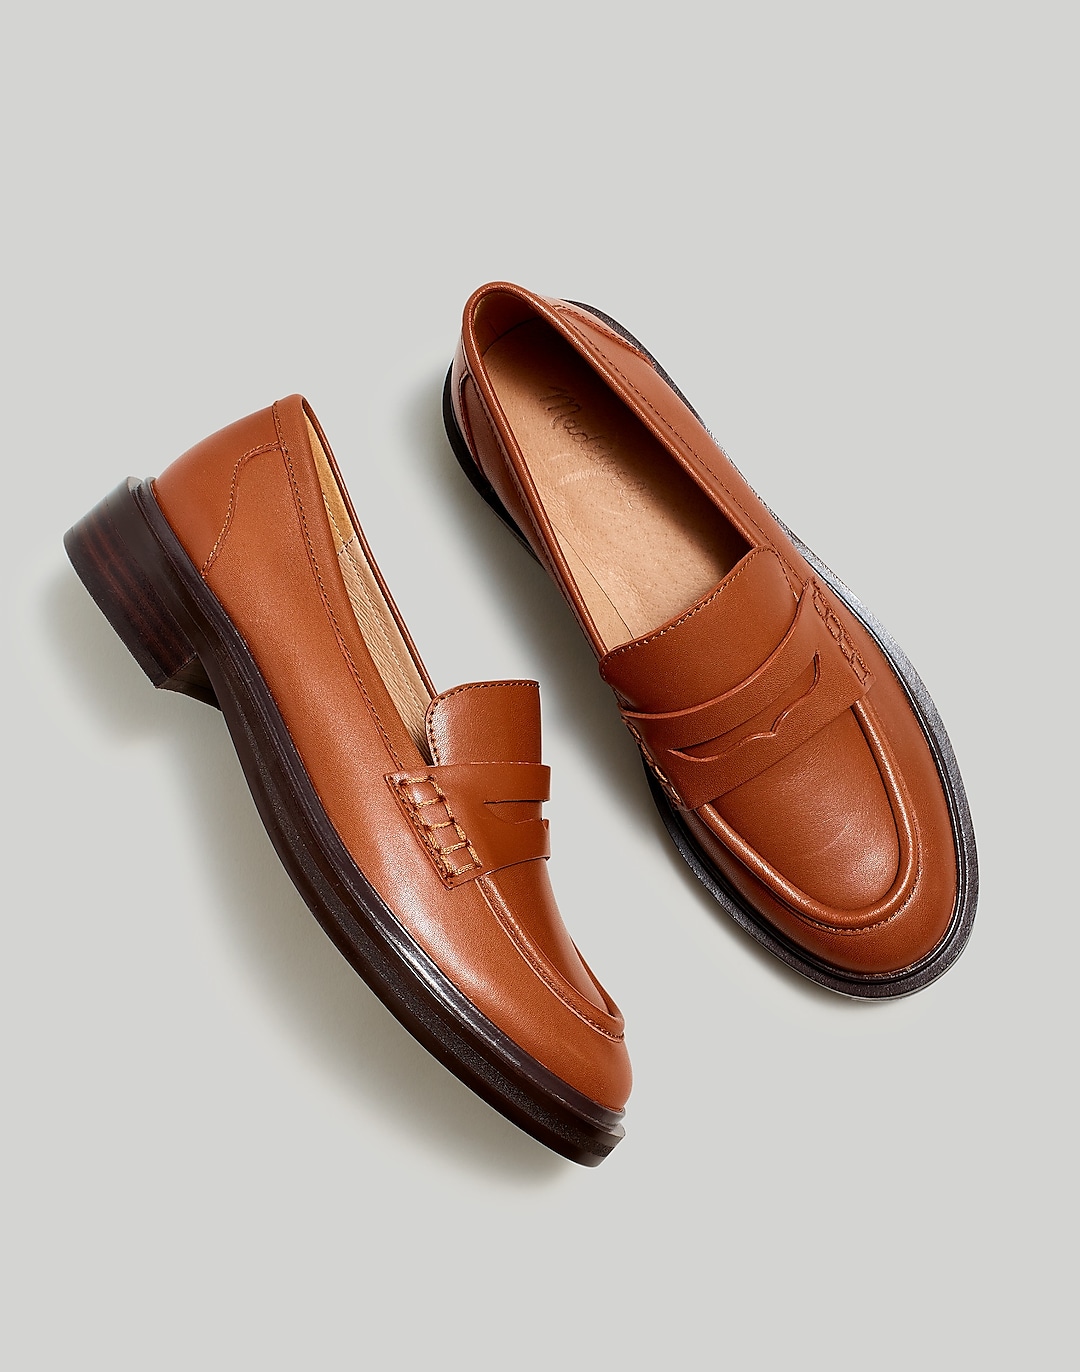 The Vernon Loafer | Madewell